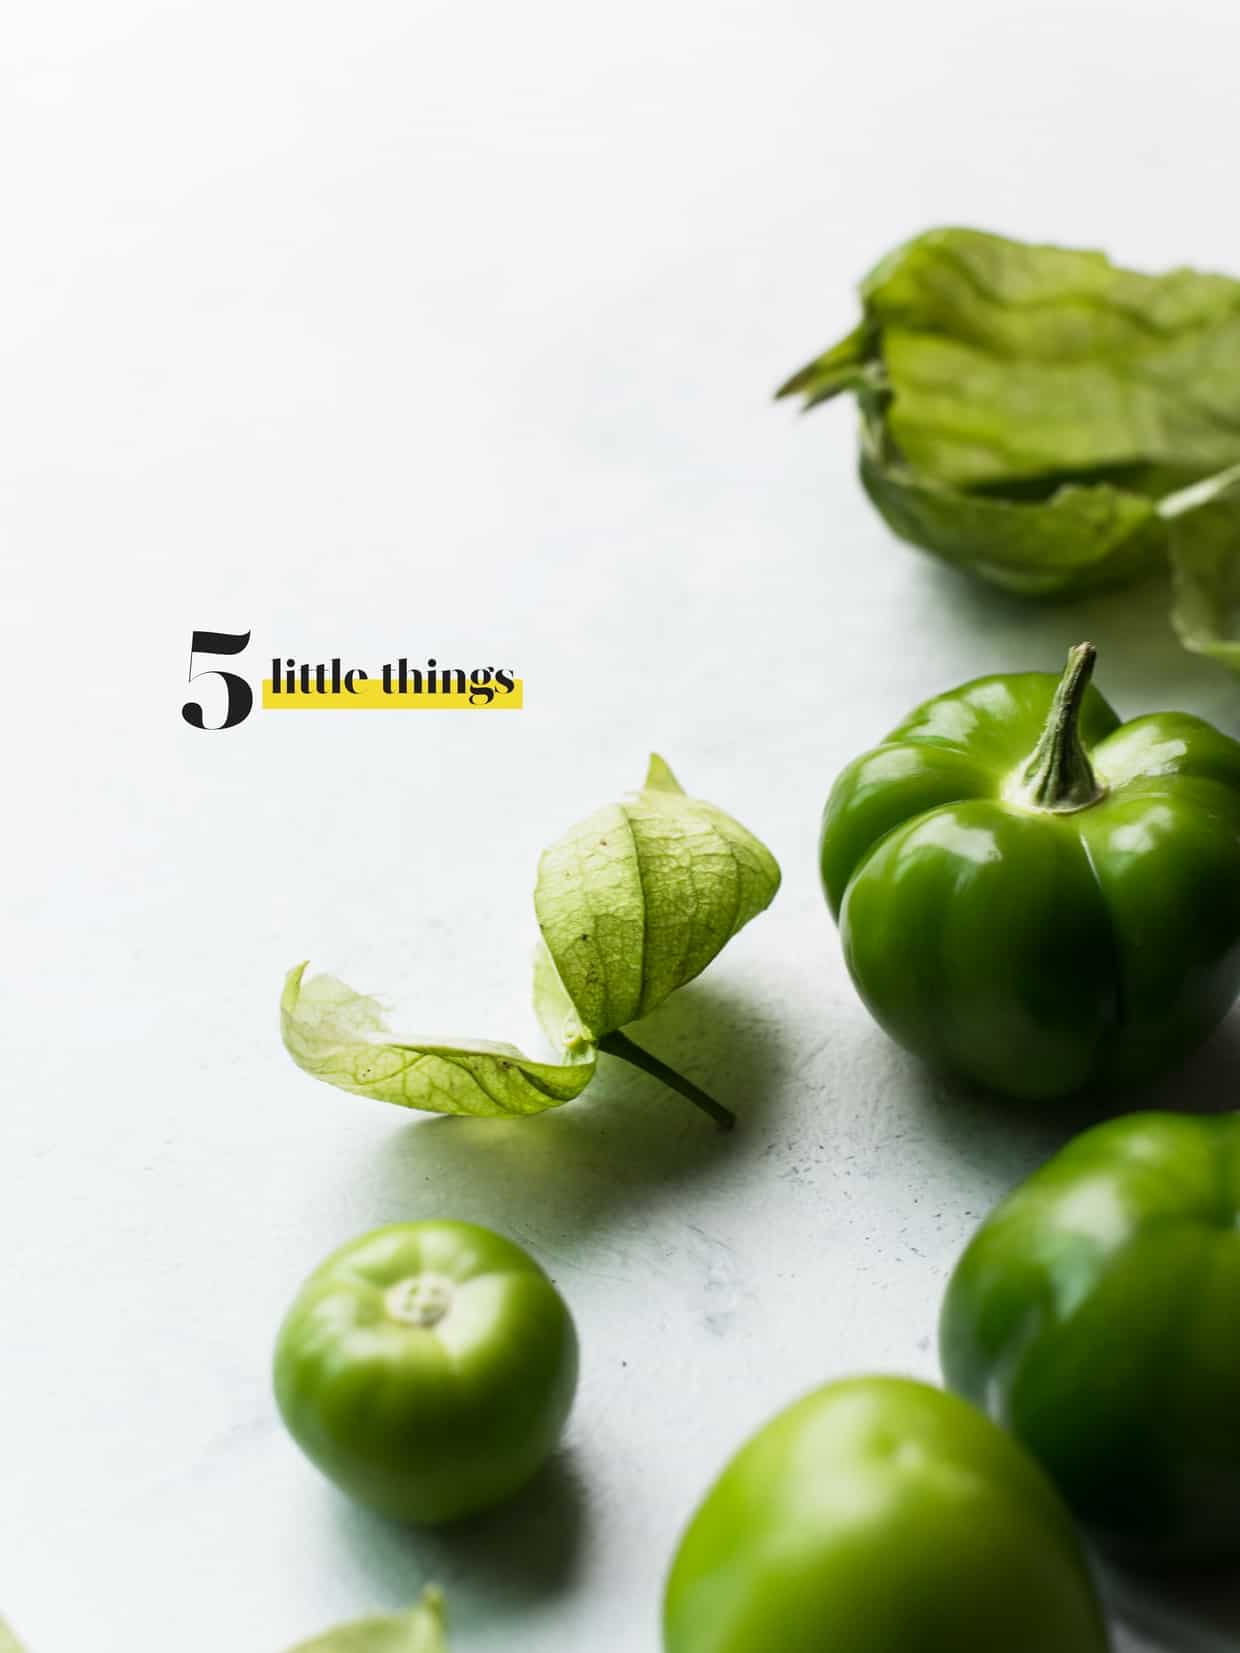 Several green tomatillos on a counter top | Five Little Things I loved the week of October 21, 2016.